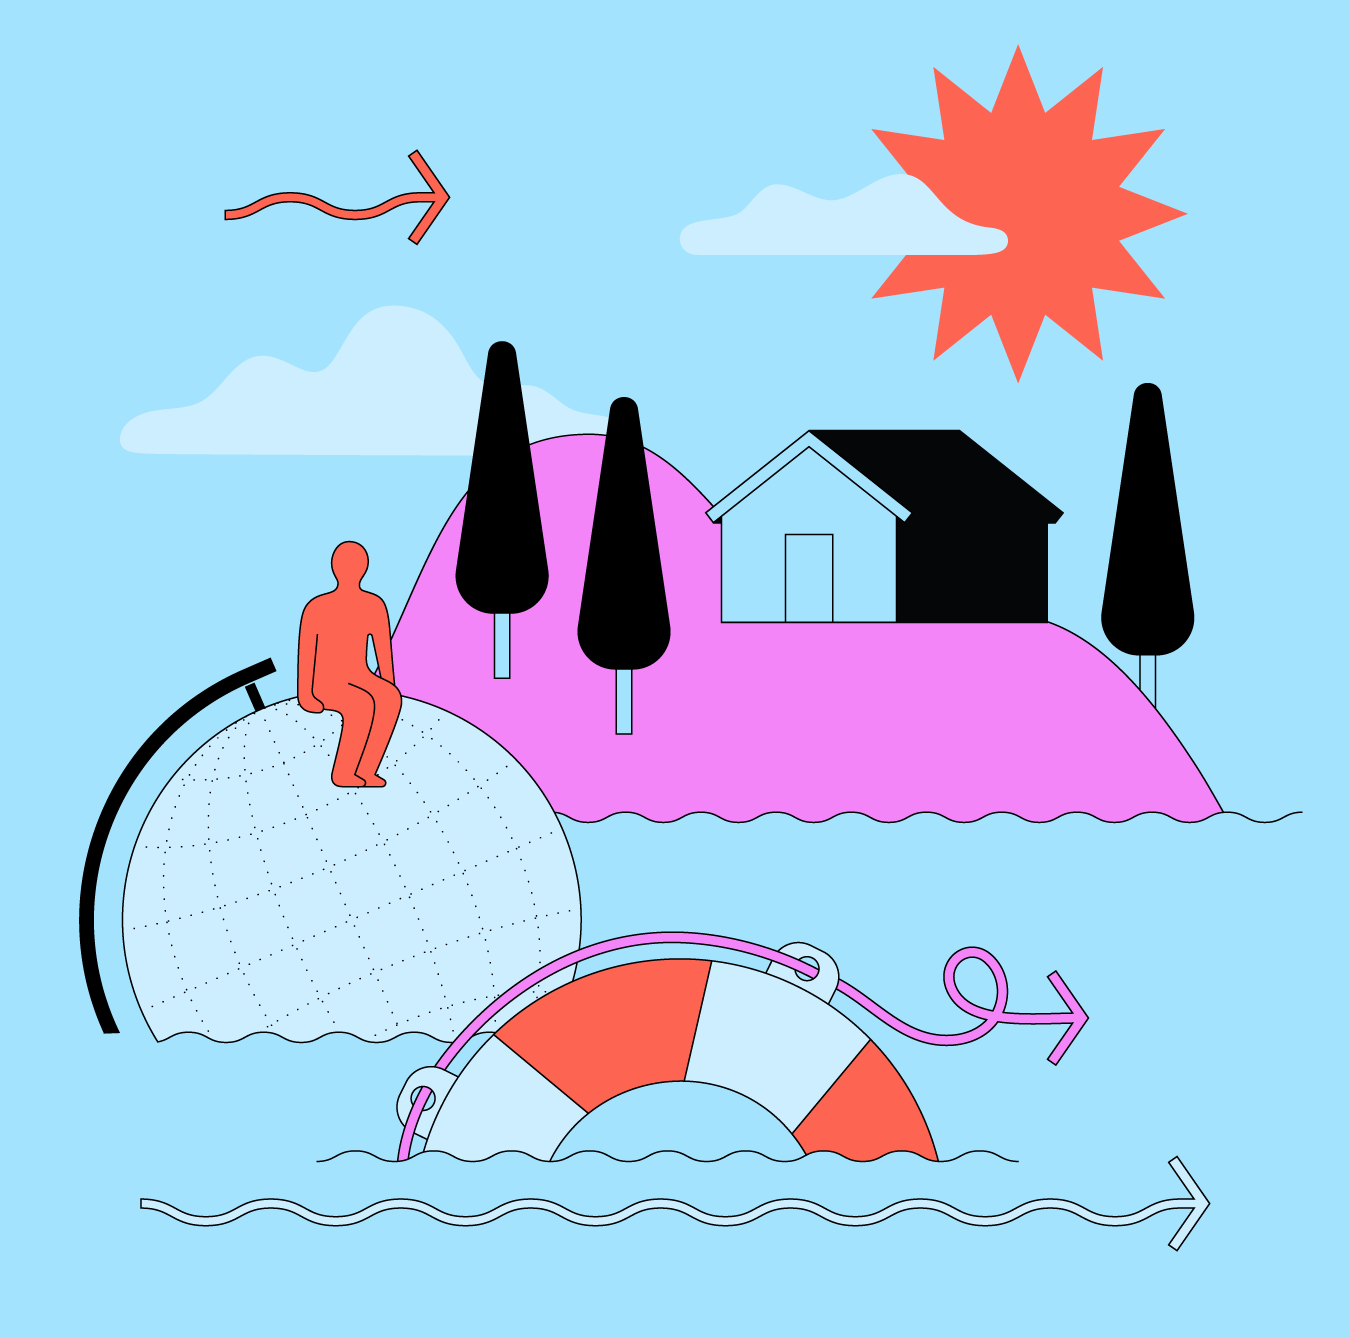 Illustration graphic of the ocean, a lifebuoy, a floating globe with a person sitting on it and an island with a house an three trees on it